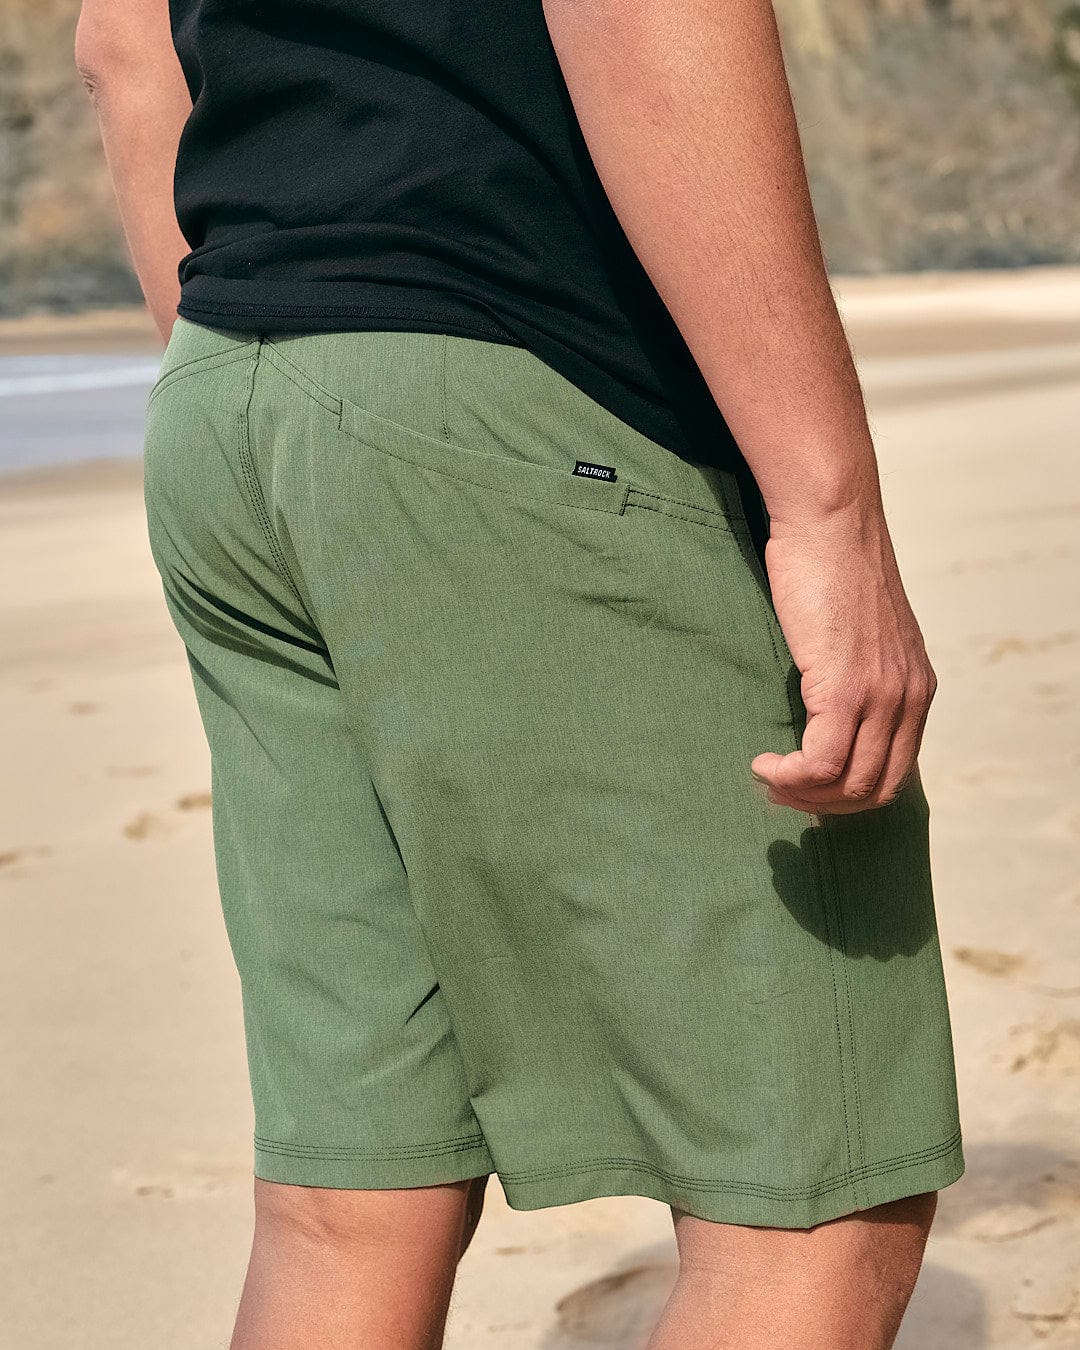 An essential man's wear, the Saltrock Cargo Amphibian II - Mens Boardshort - Dark Green are donned by a man standing on the beach.